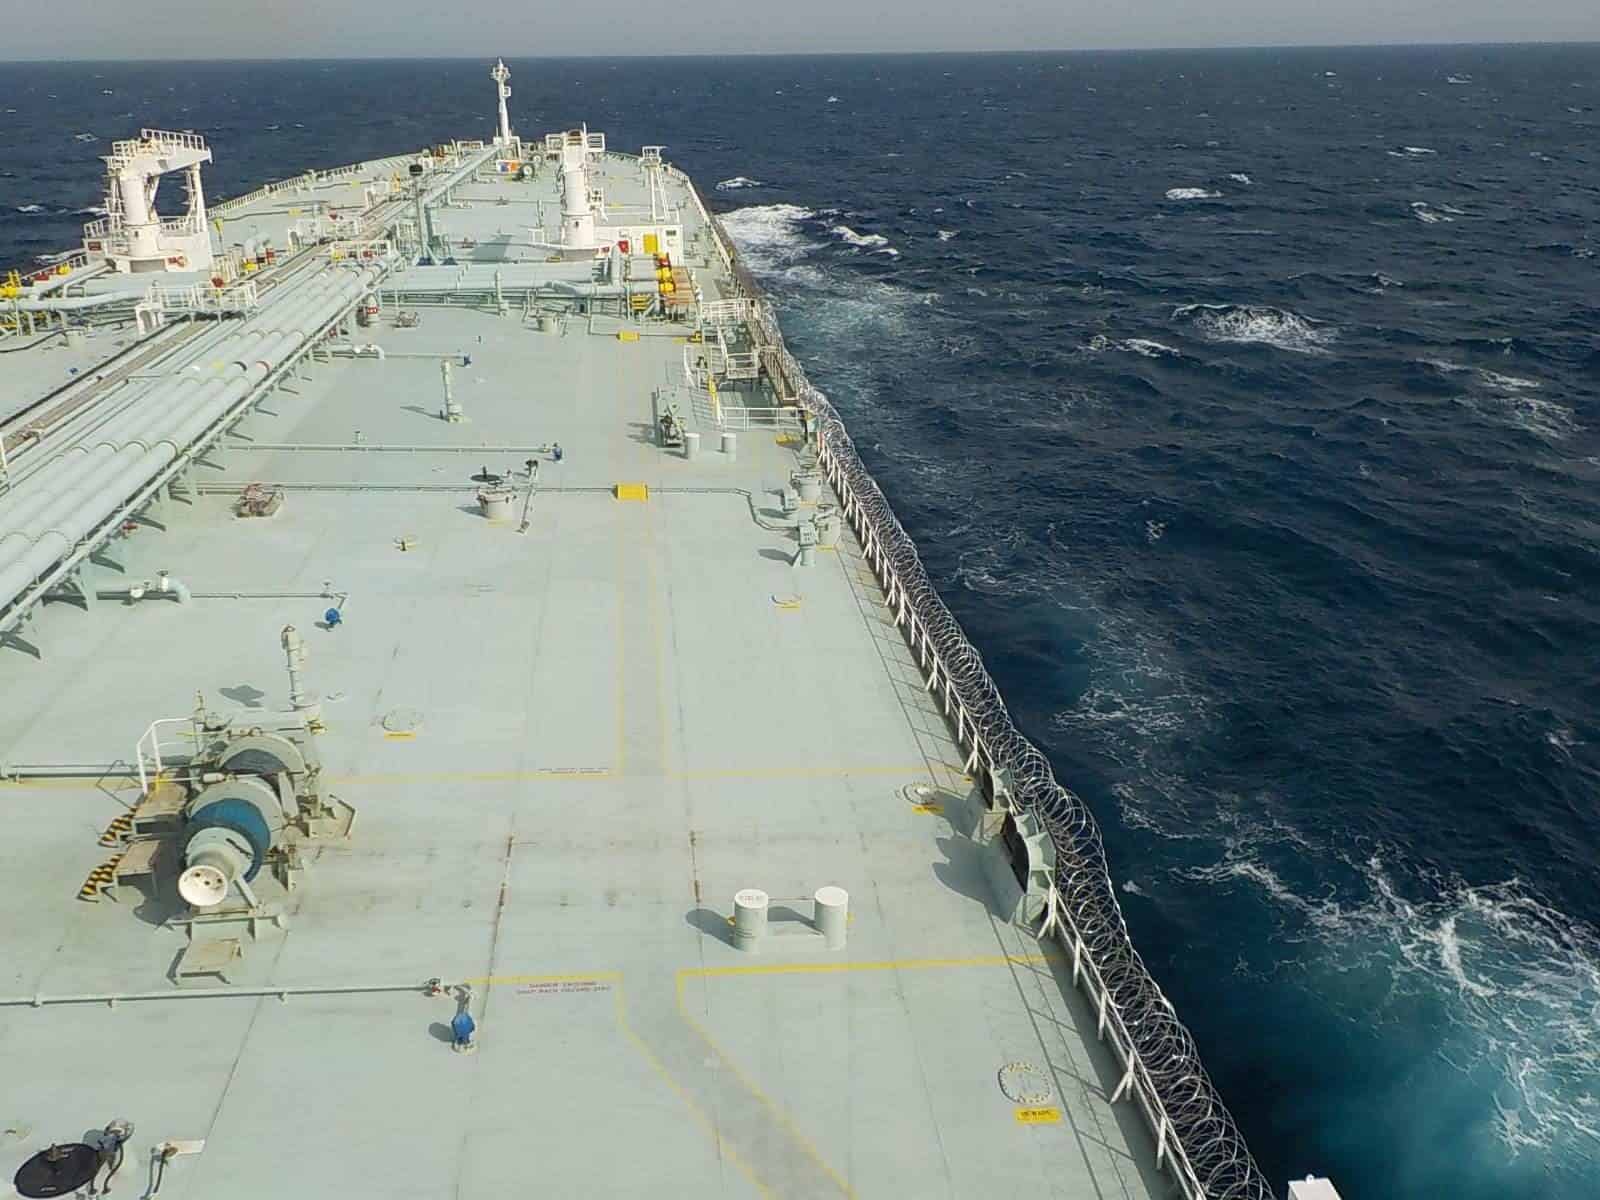 1. Onboard a tanker. Credits to Despoina Paidousi